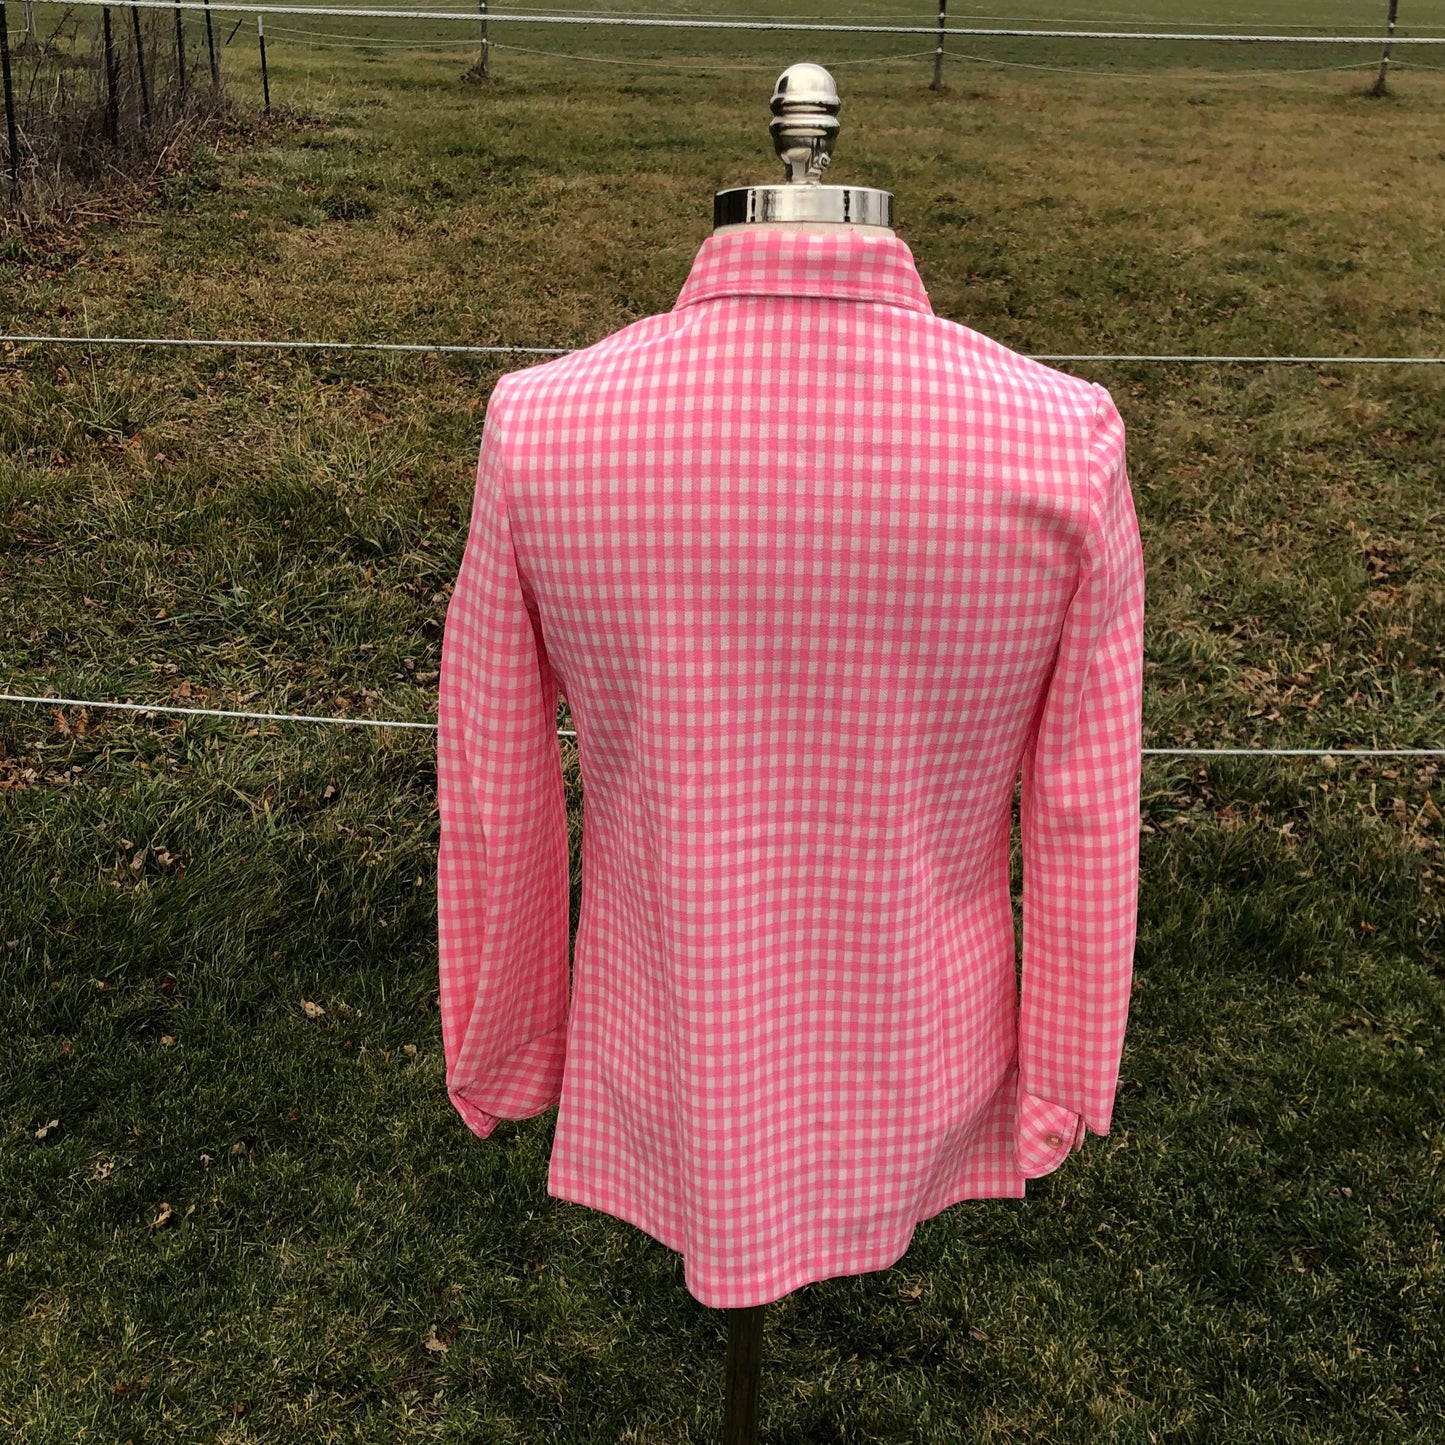 70’s Vintage Women’s Bubble Gum Pink and White Gingham Polyester Shirt with Pockets